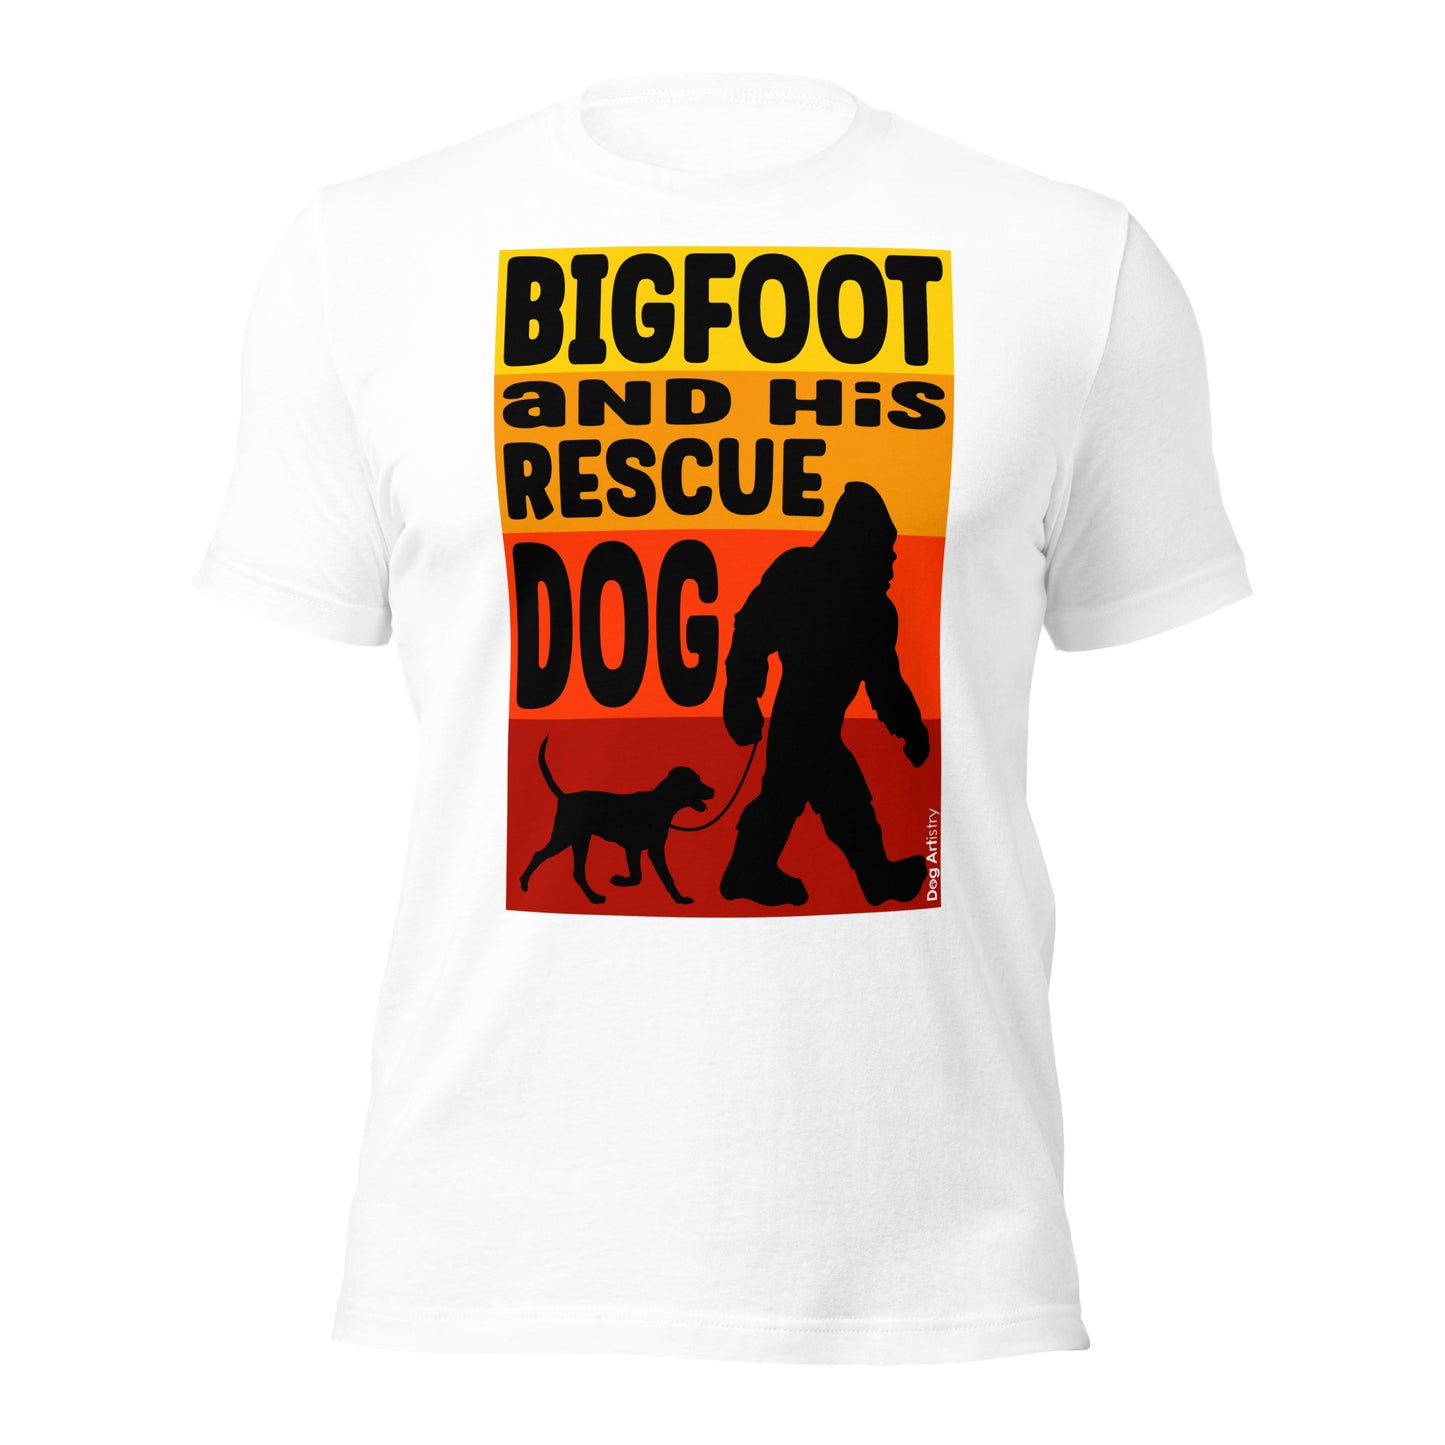 Bigfoot and his rescue dog unisex white t-shirt by Dog Artistry.